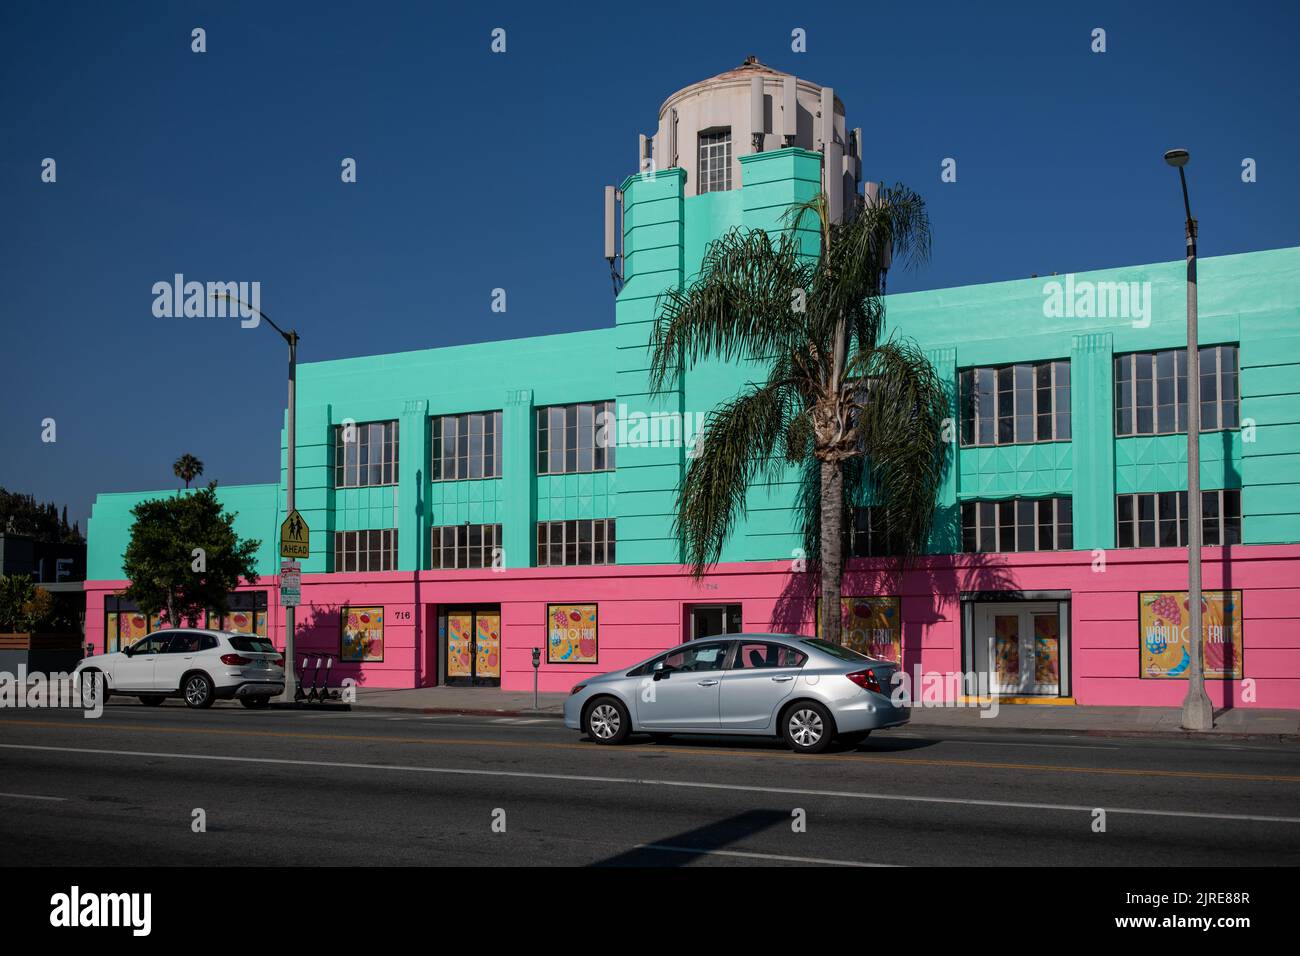 The Pink and Teal three-story building in Los Angeles California Stock Photo